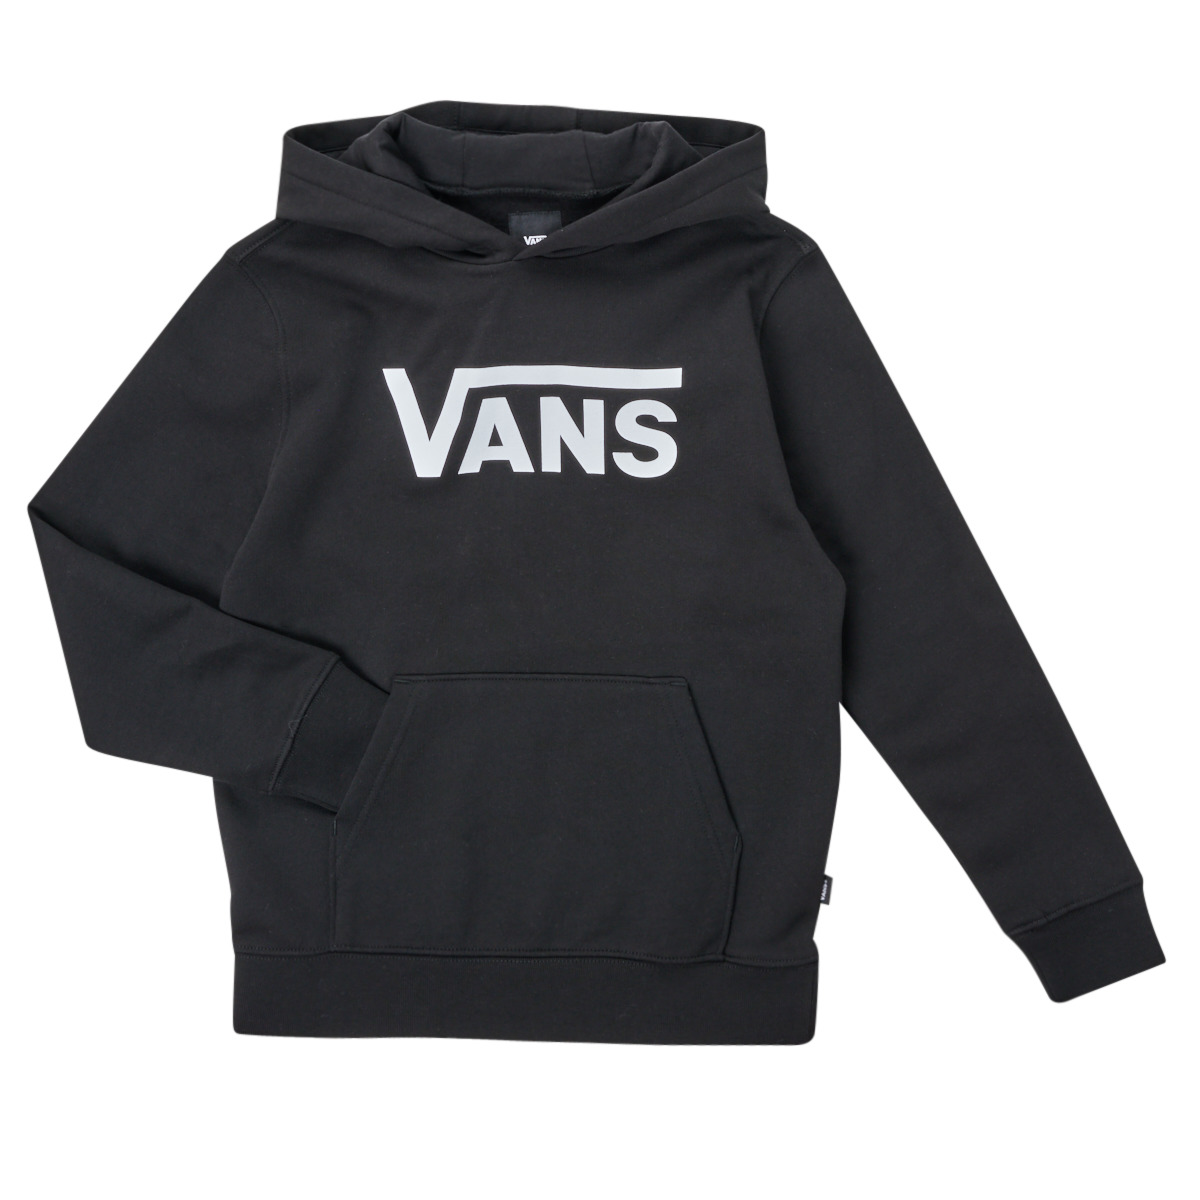 | PO CLASSIC sweaters Black NET ! - Spartoo VANS Clothing - Vans Child delivery BY KIDS Free